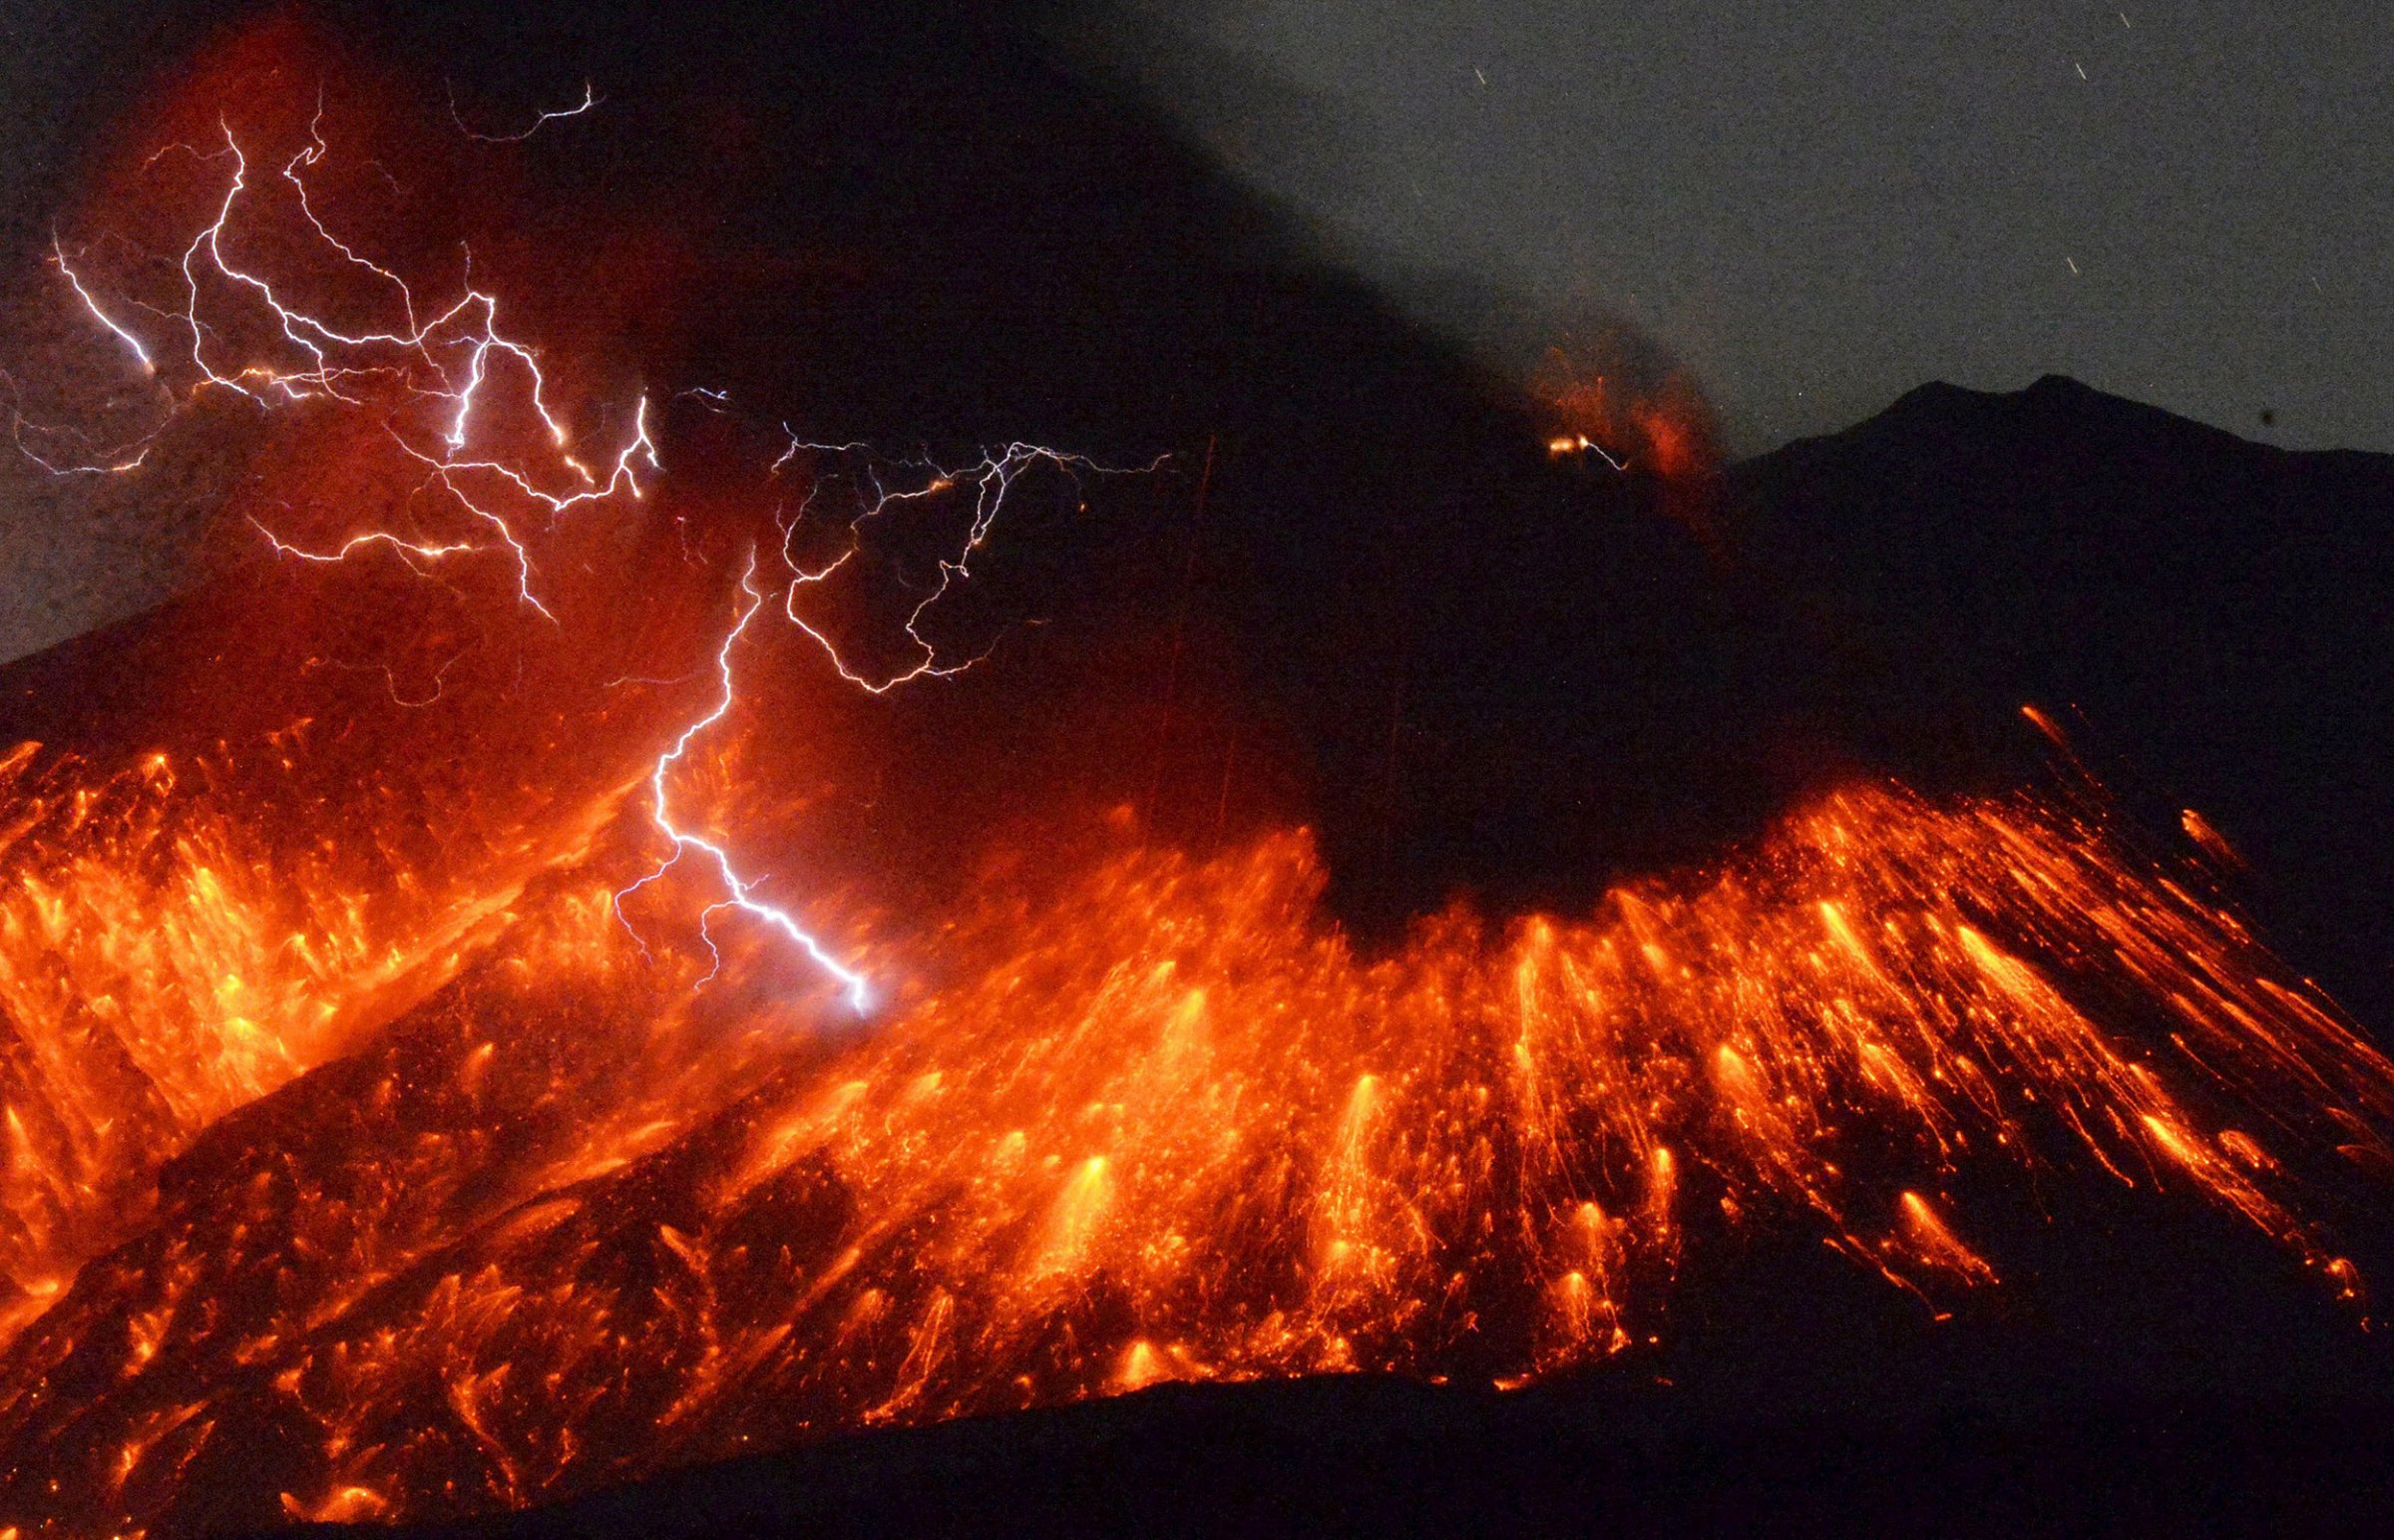 Volcanic lightning is seen at an eruption of Mount Sakurajima from Tarumizu city in southwestern Japan on Feb. 5, 2016. A Japanese volcano about 30 miles from a nuclear plant erupted on Friday, Japan's Meteorological Agency said, sending fountains of lava into the night sky.